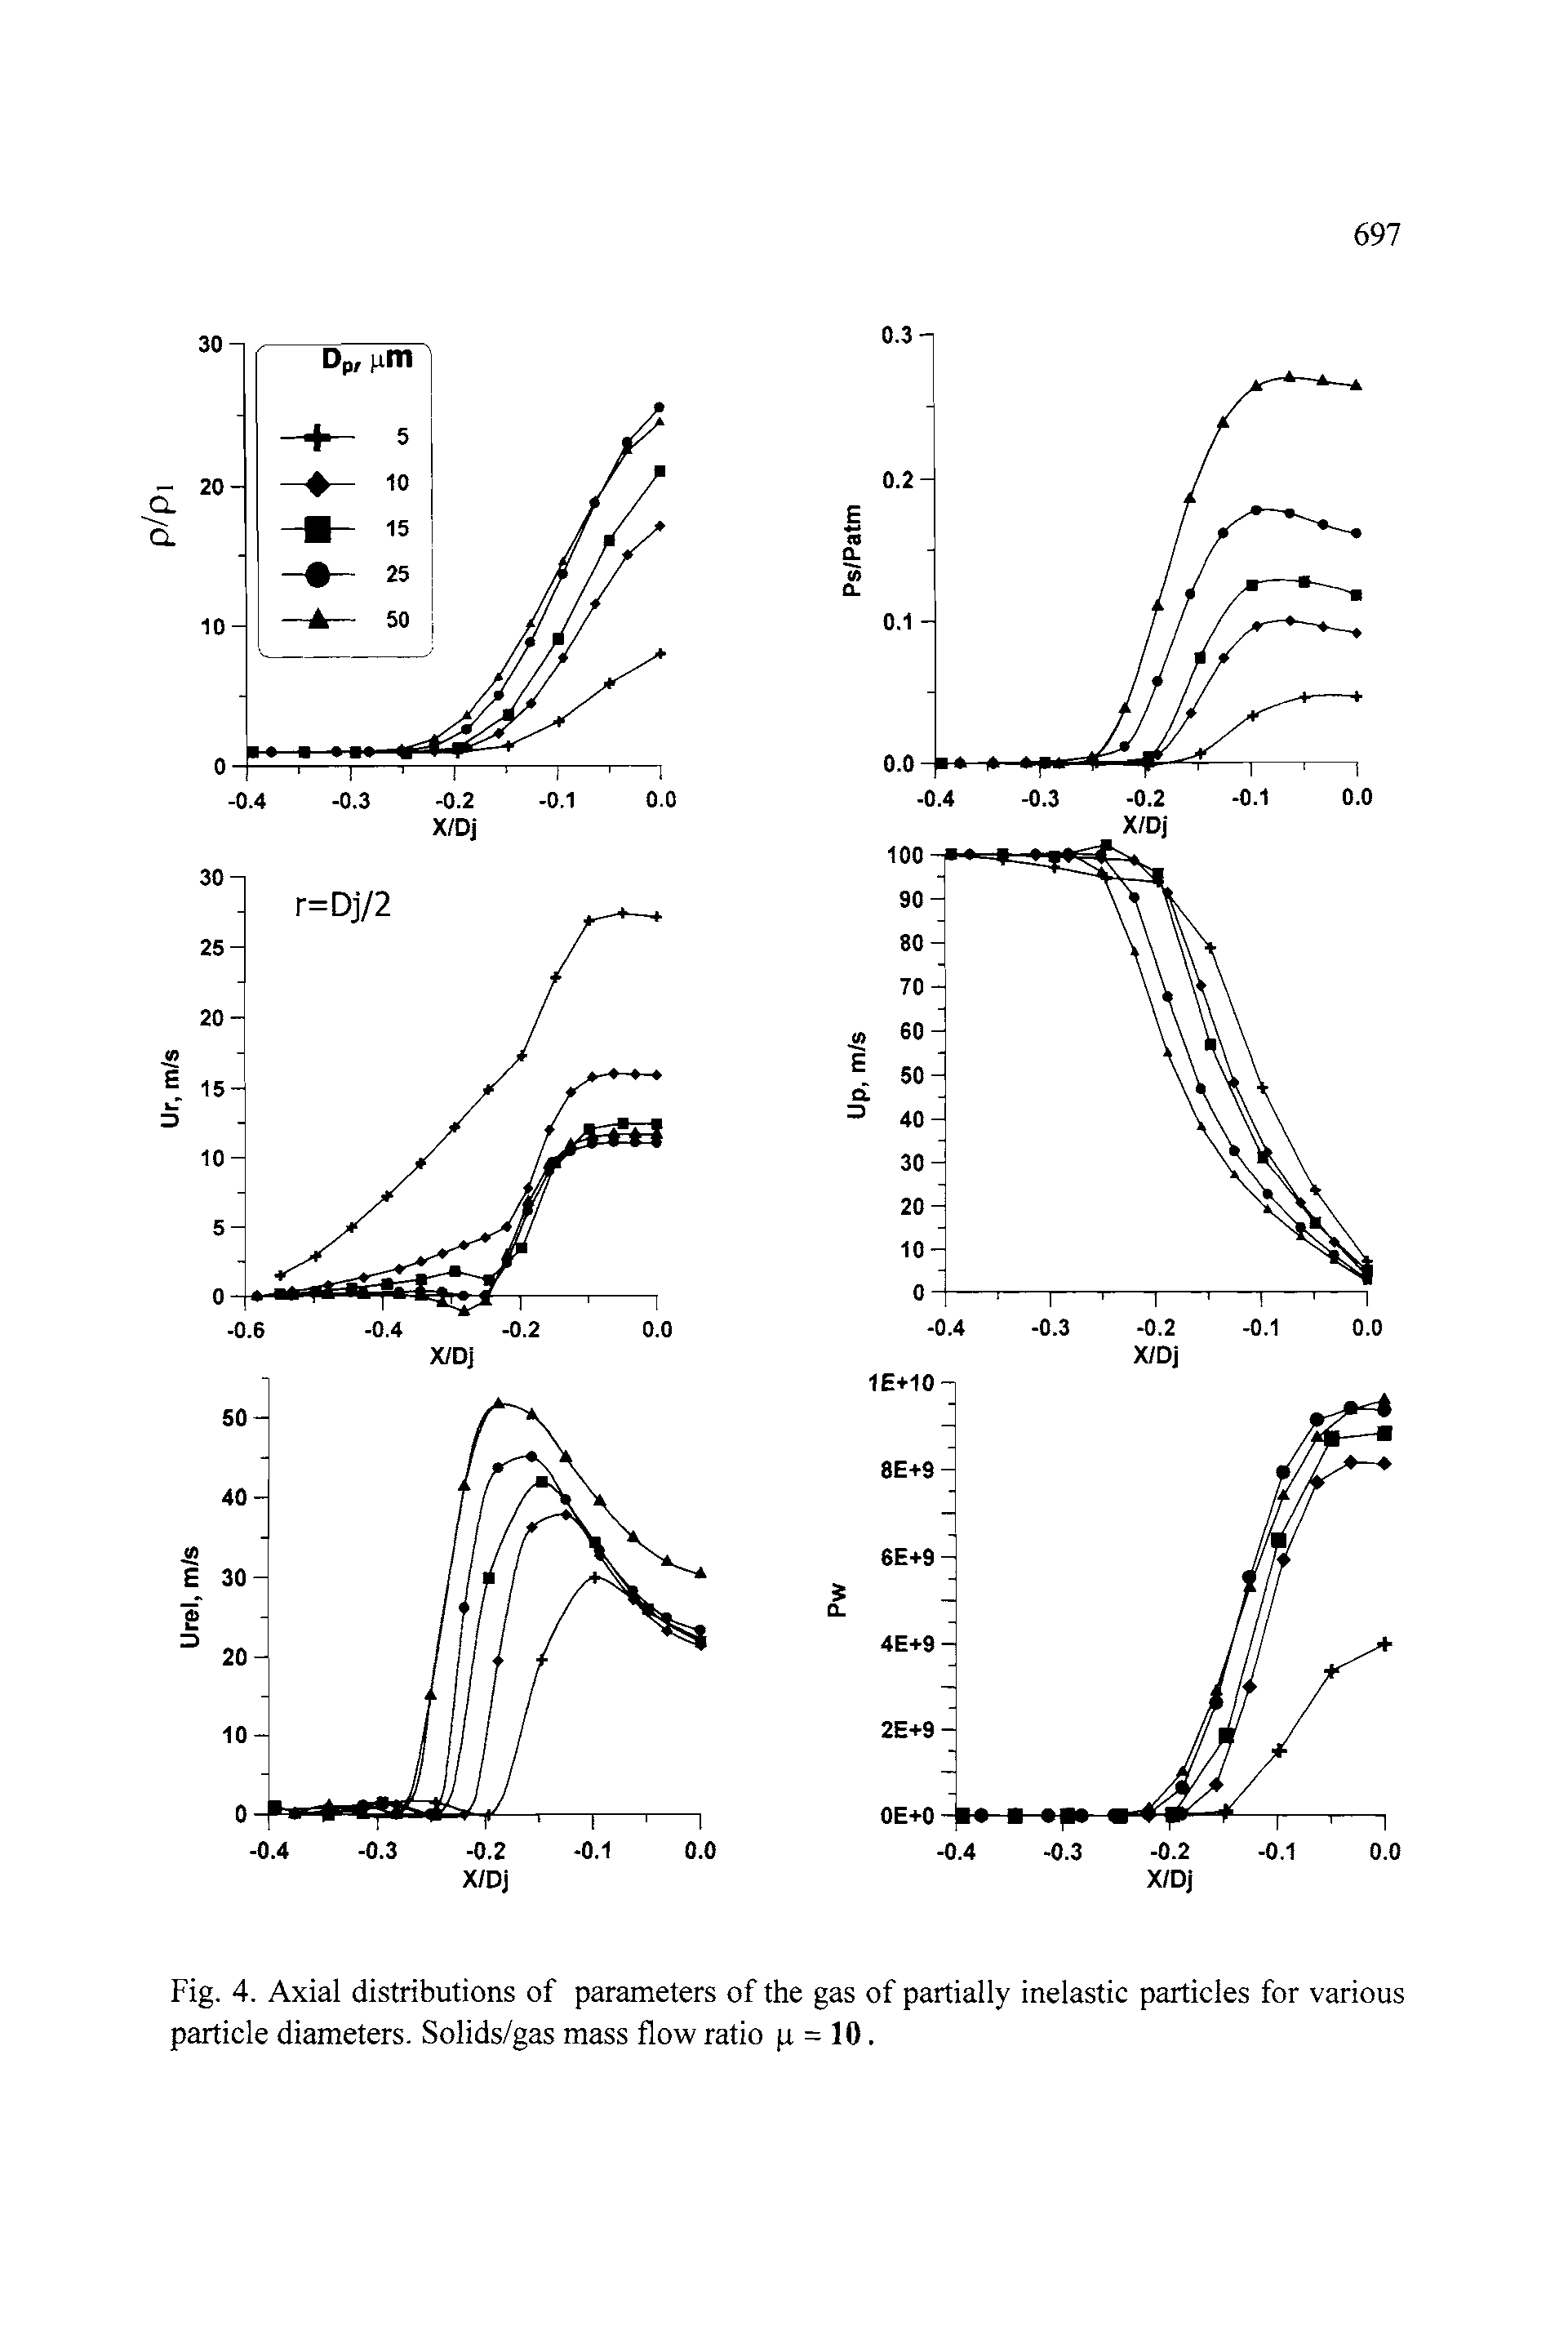 Fig. 4. Axial distributions of parameters of the gas of partially inelastic particles for various particle diameters. Solids/gas mass flow ratio p = 10.